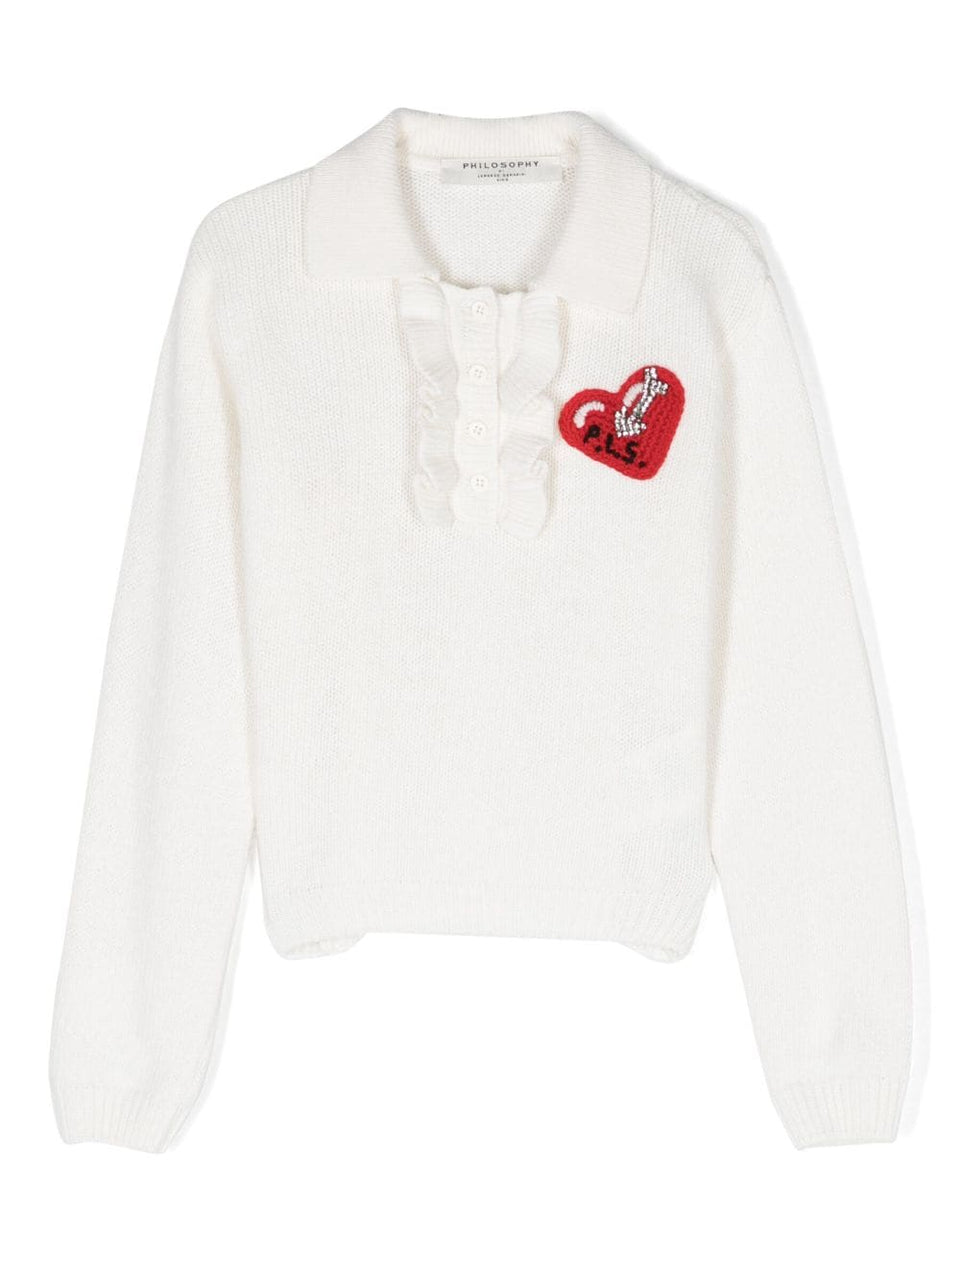 Philosophy White Knit Collared Sweater with Heart